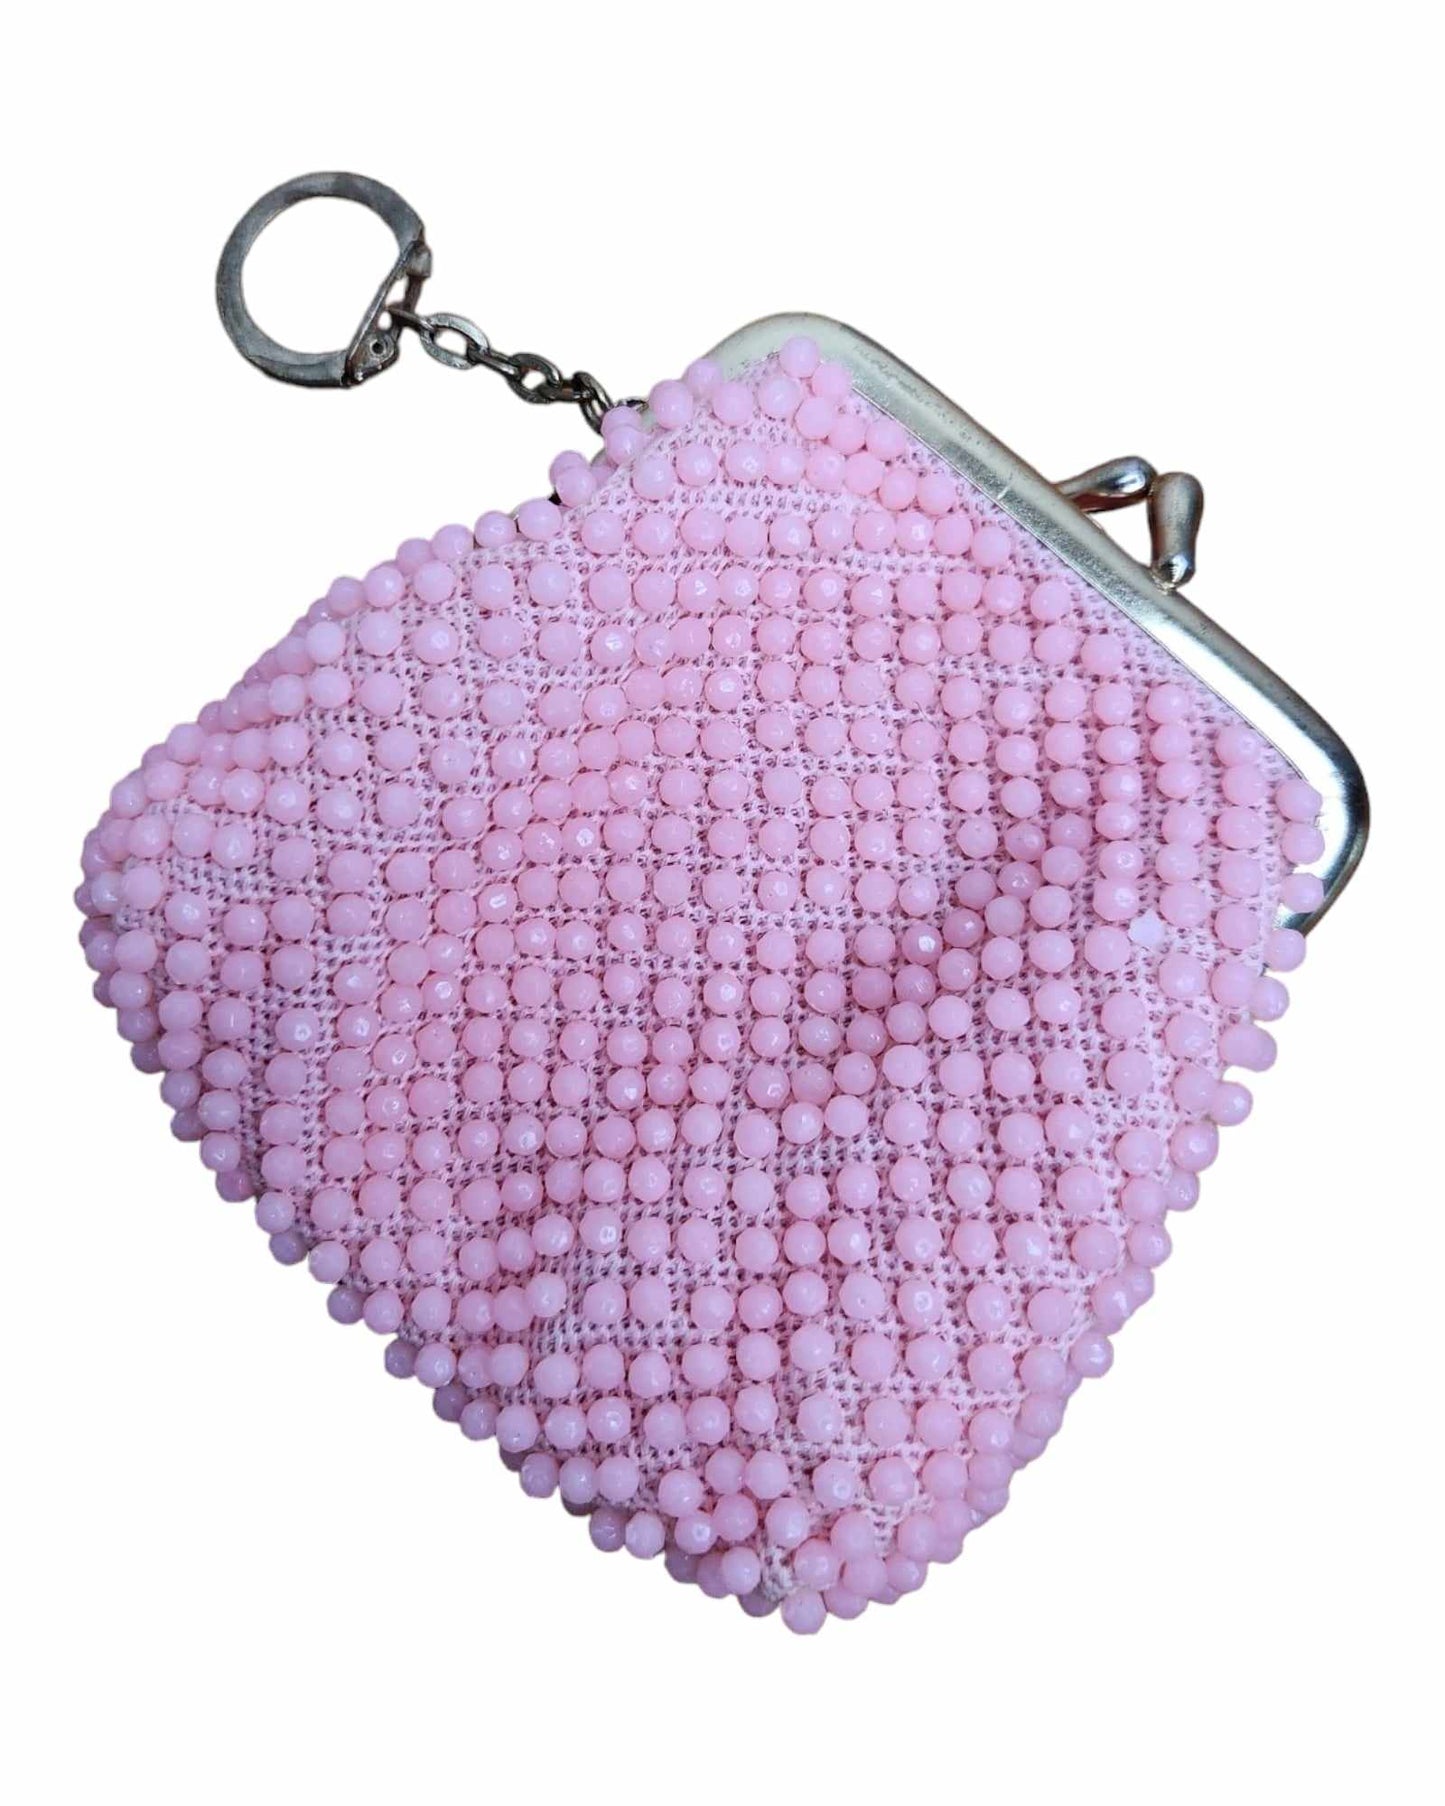 Vintage Beaded Coin Purse